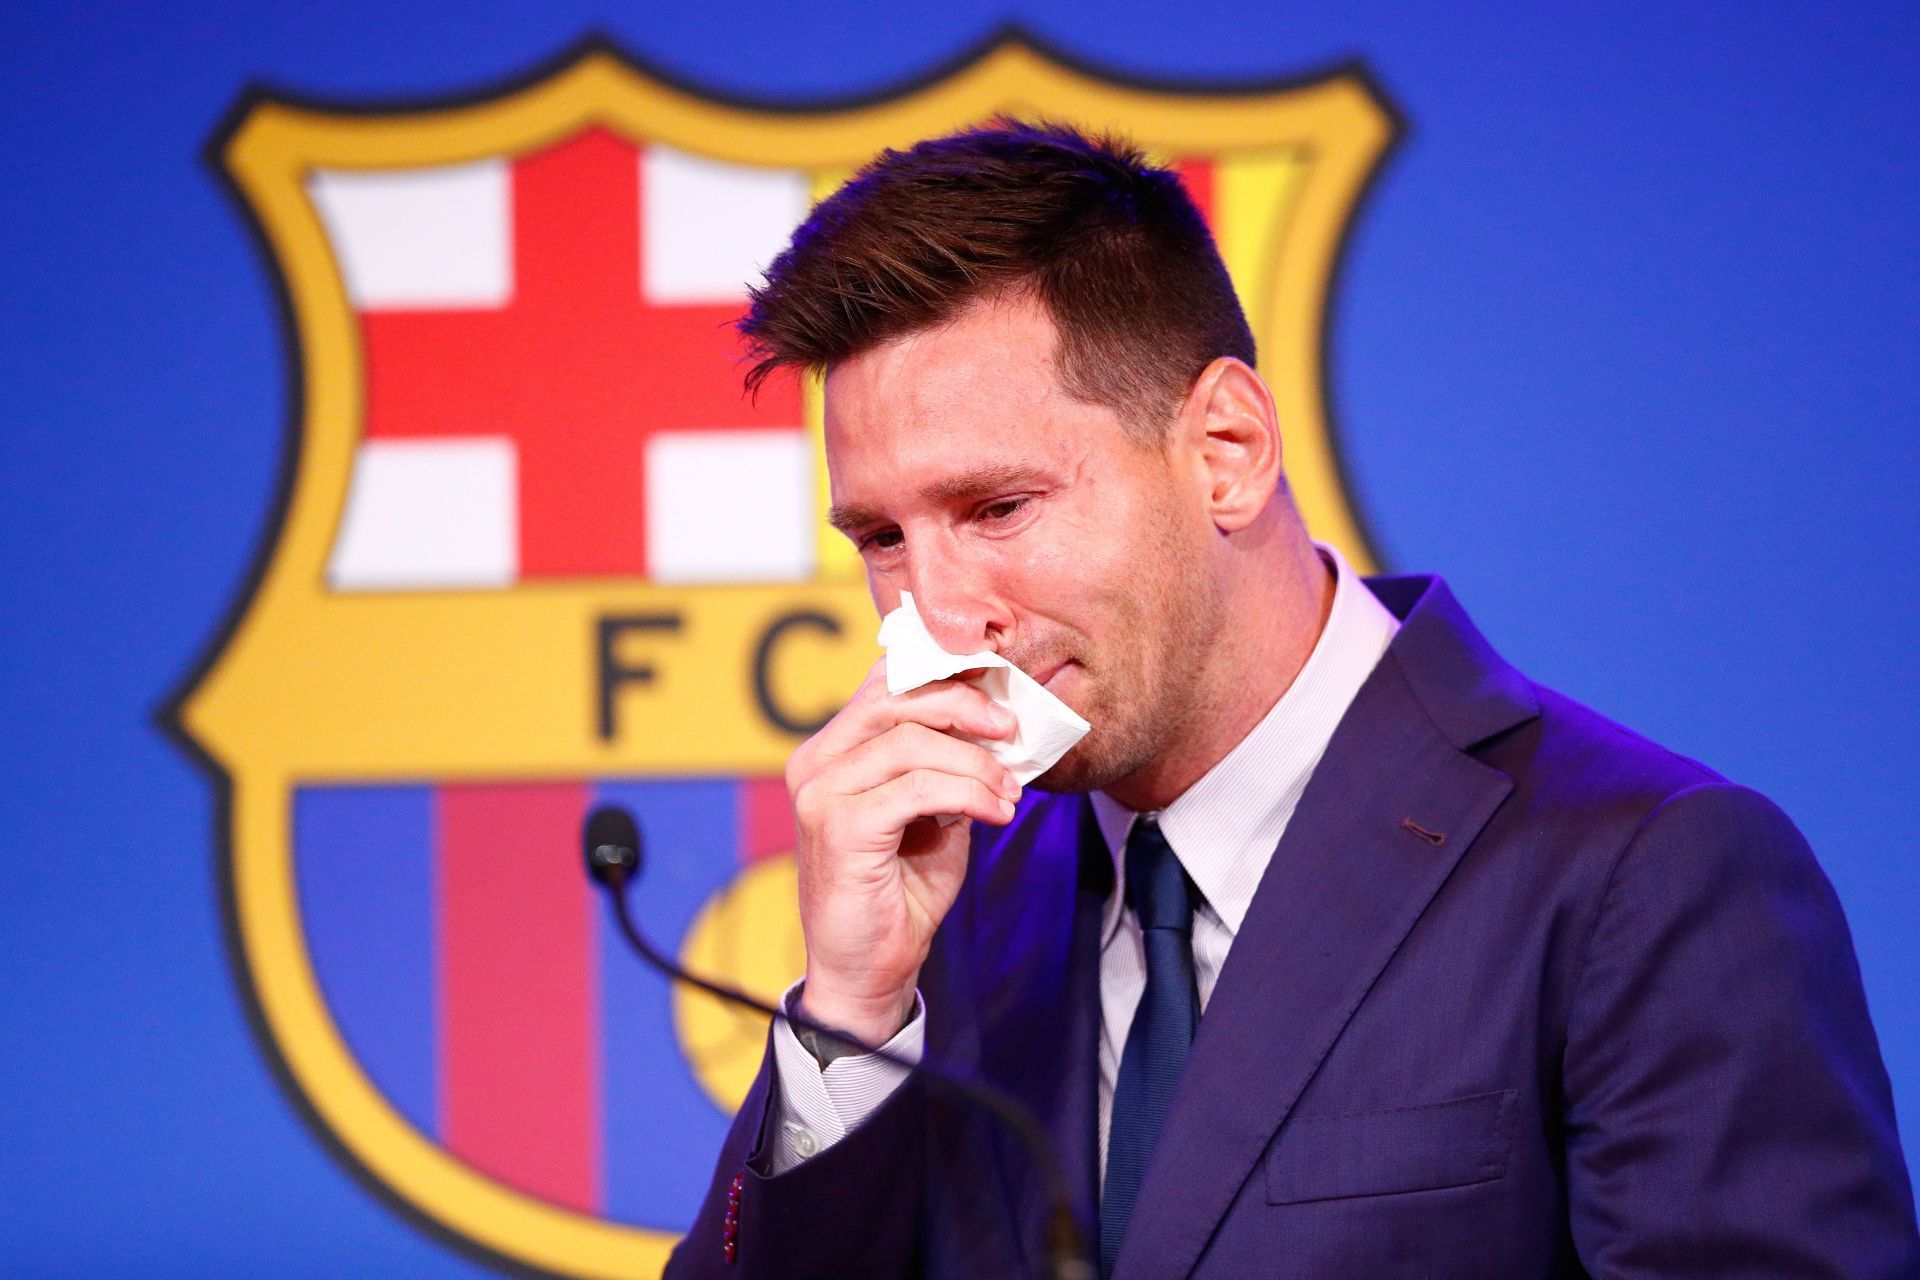 Lionel Messi left Barcelona on a free transfer in the summer of 2021